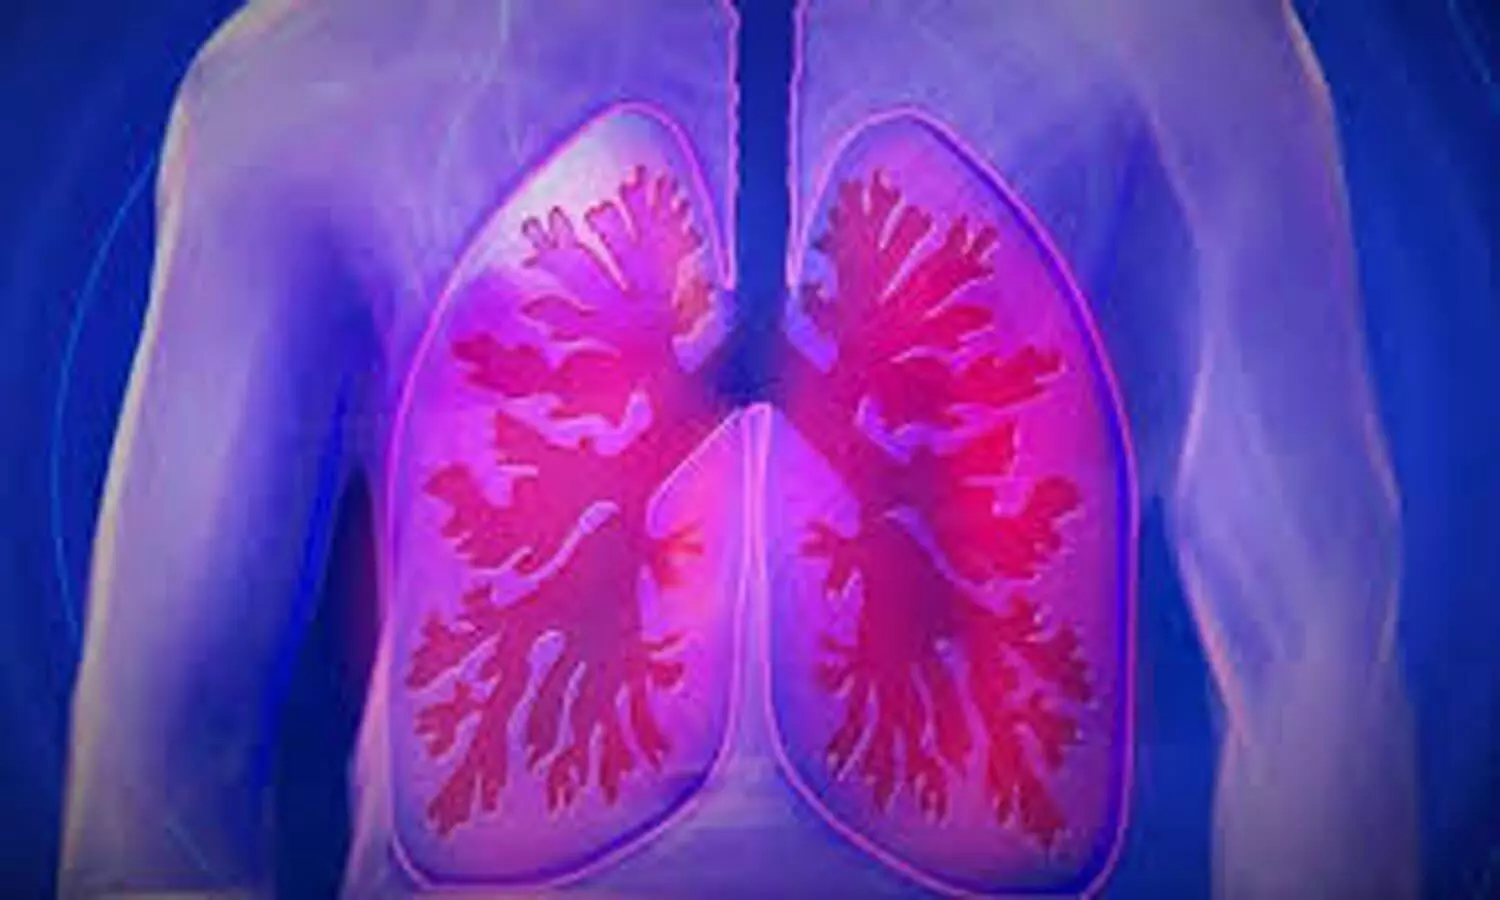 Rovalpituzumab tesirine ineffective against small cell lung cancer, confirm four studies